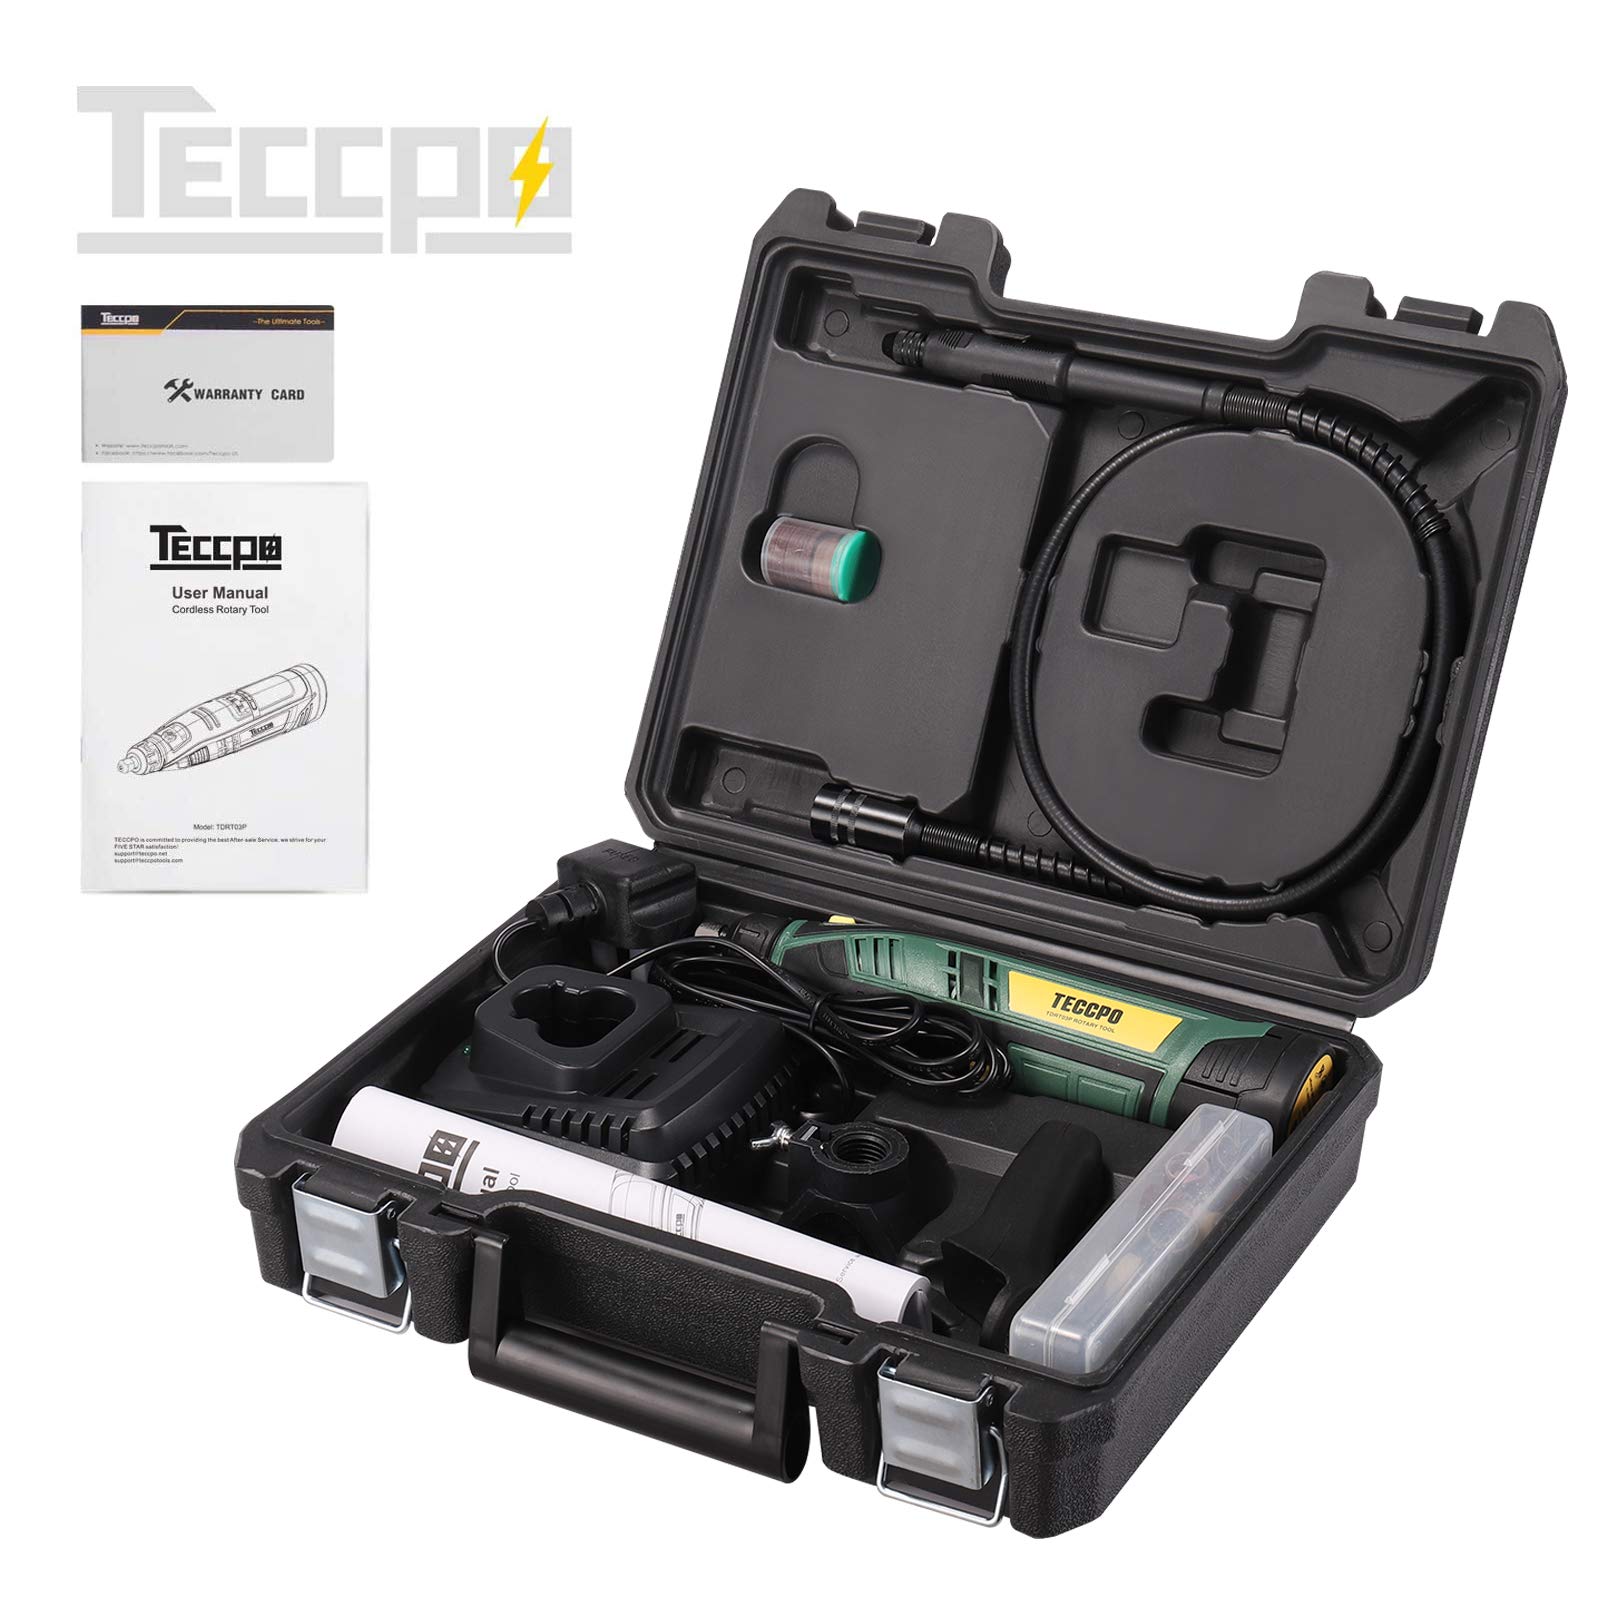 TECCPO 12V Cordless Rotary Tool Kit, 1-Hour Fast Charger, Universal Keyless Chuck, 6-Speeds Adjustable, 80 Accessories, Ideal for DIY & Crafts, Cutting, Engraving, etc.